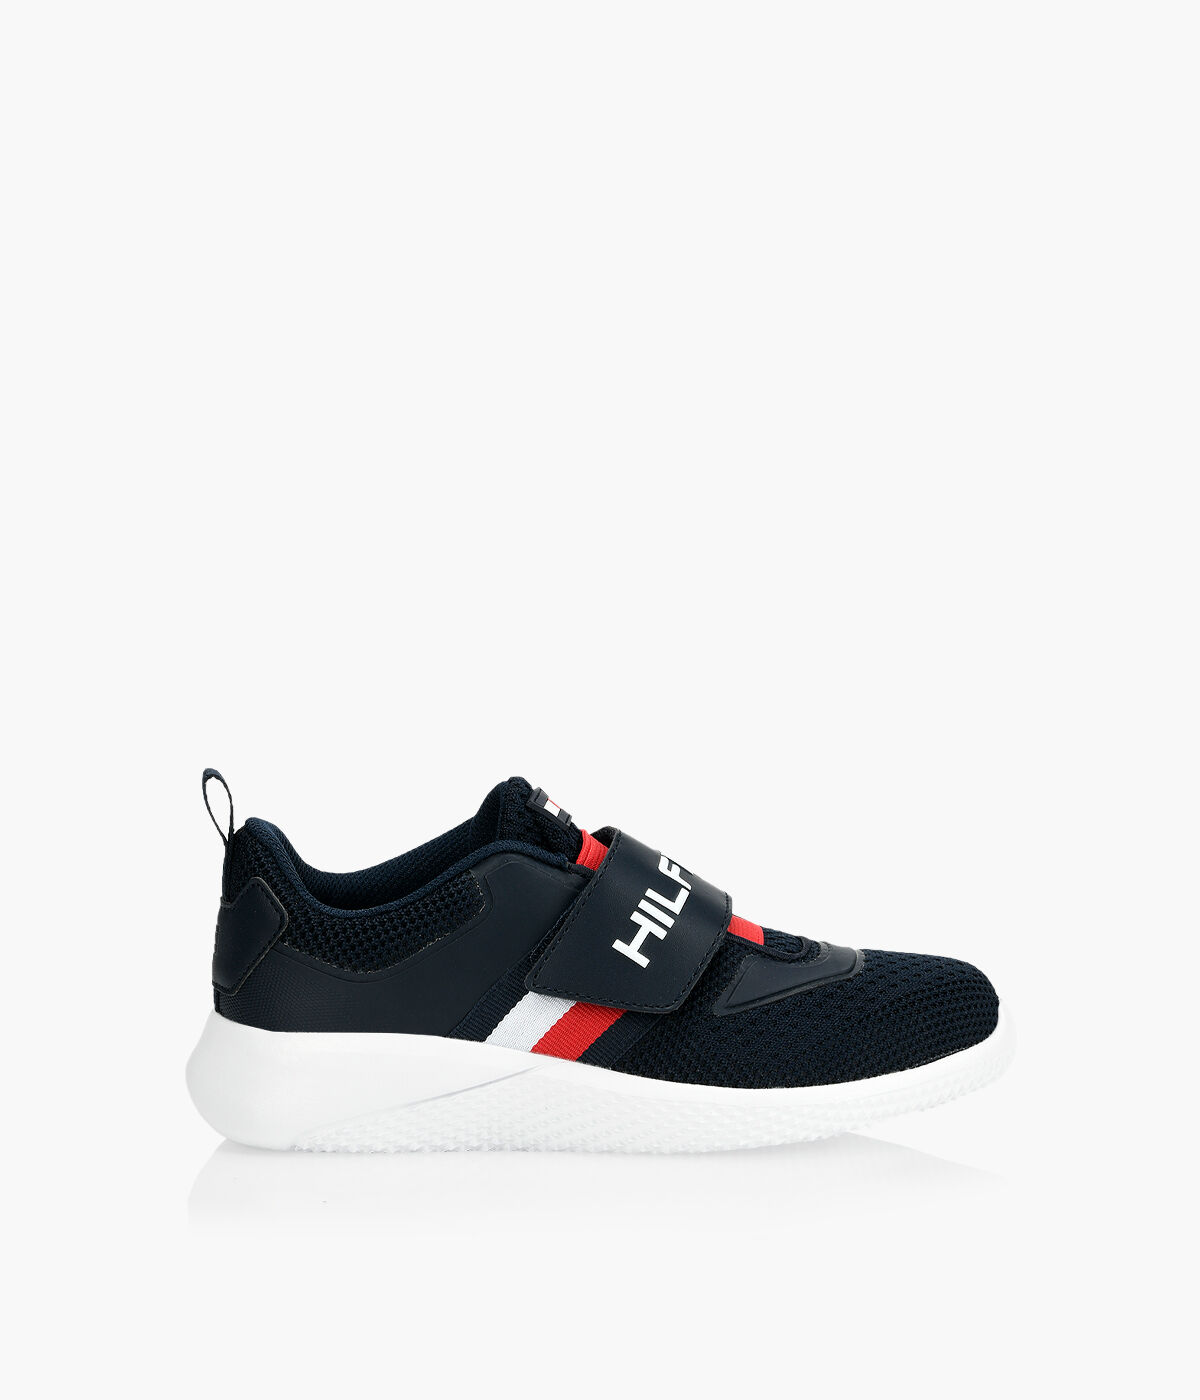 tommy hilfiger shoes canada